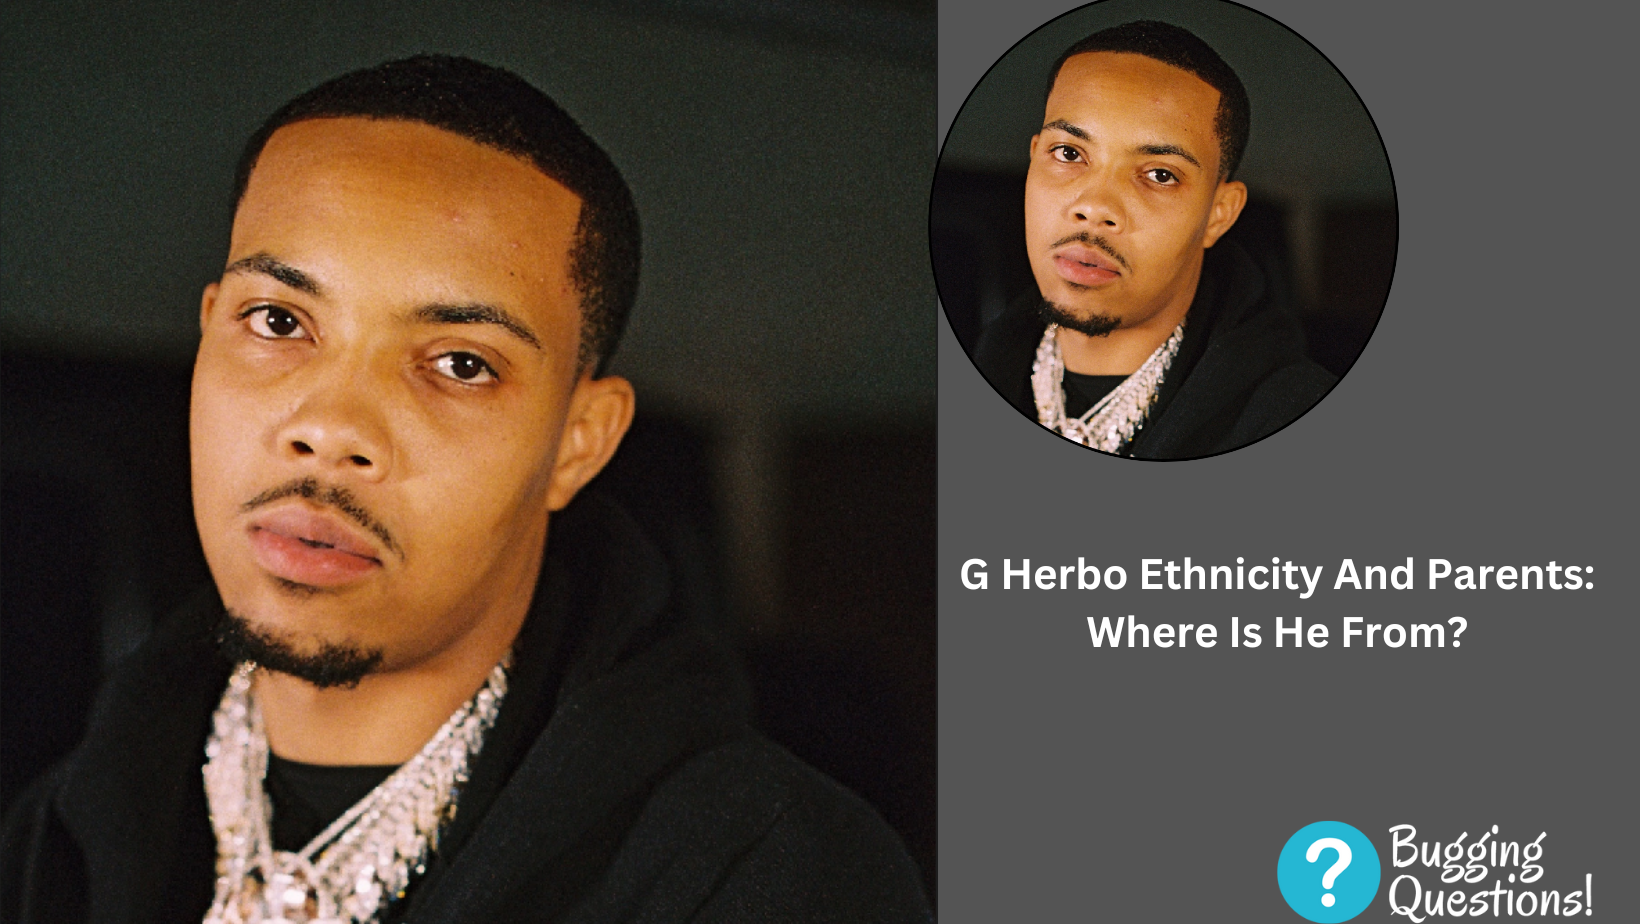 G Herbo Ethnicity And Parents: Where Is He From?